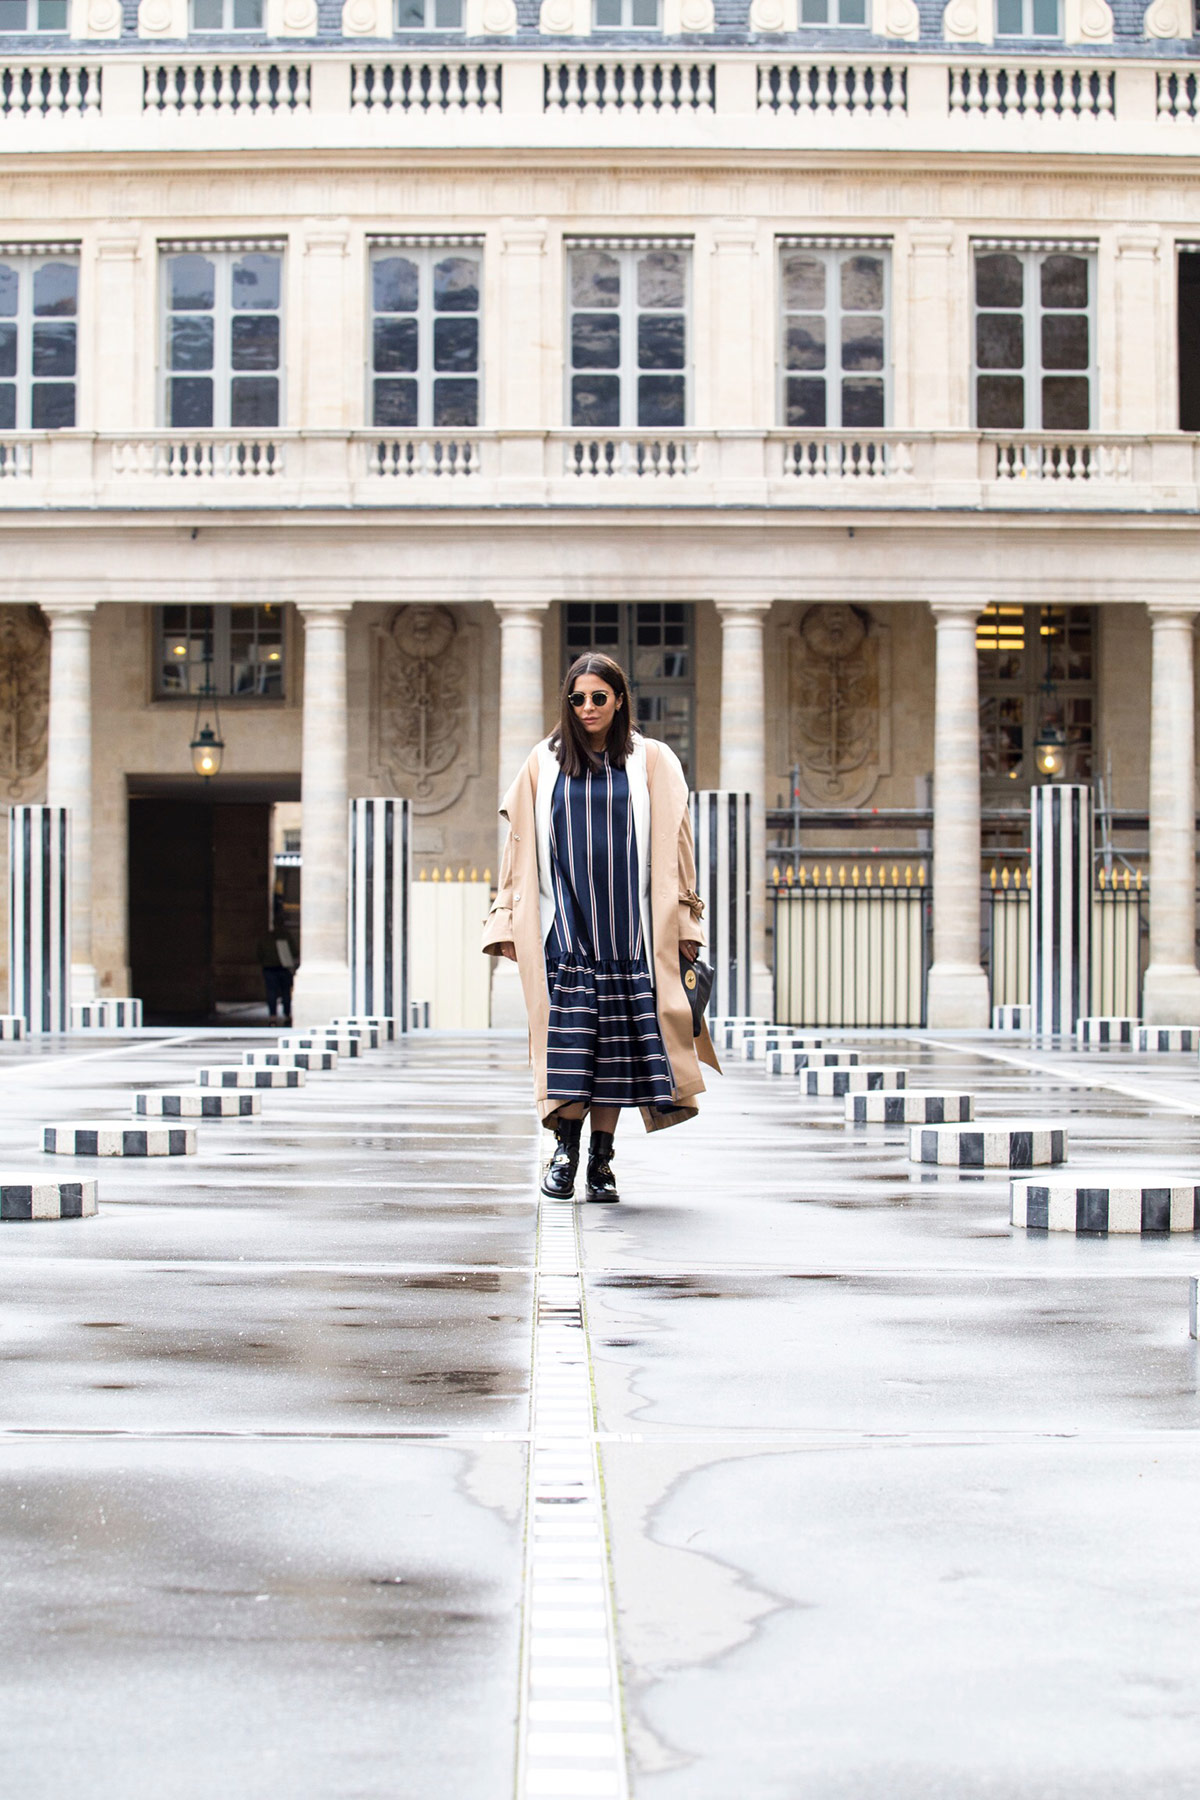 Stripes on stripes, trench coat and Balenciaga combat boots by Stella Asteria Fashion & Lifestyle Blogger during Paris Fashion Week - Paris Streetstyle and Pregnancy style inspiration - how to dress the bump in style